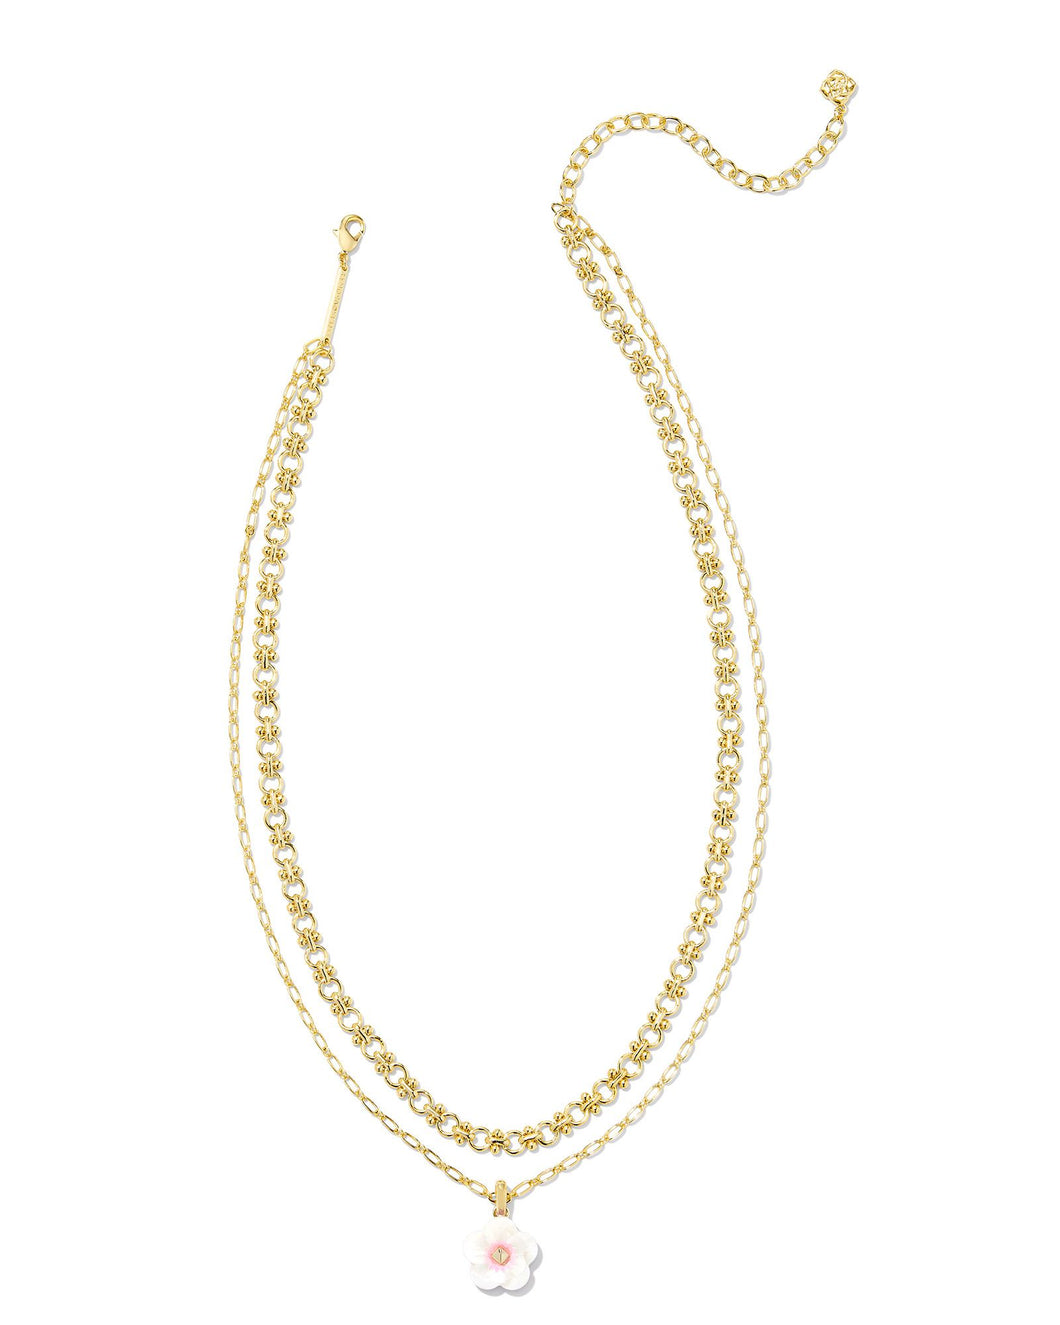 Deliah Gold Multi Strand Necklace in Iridescent Pink White Mix